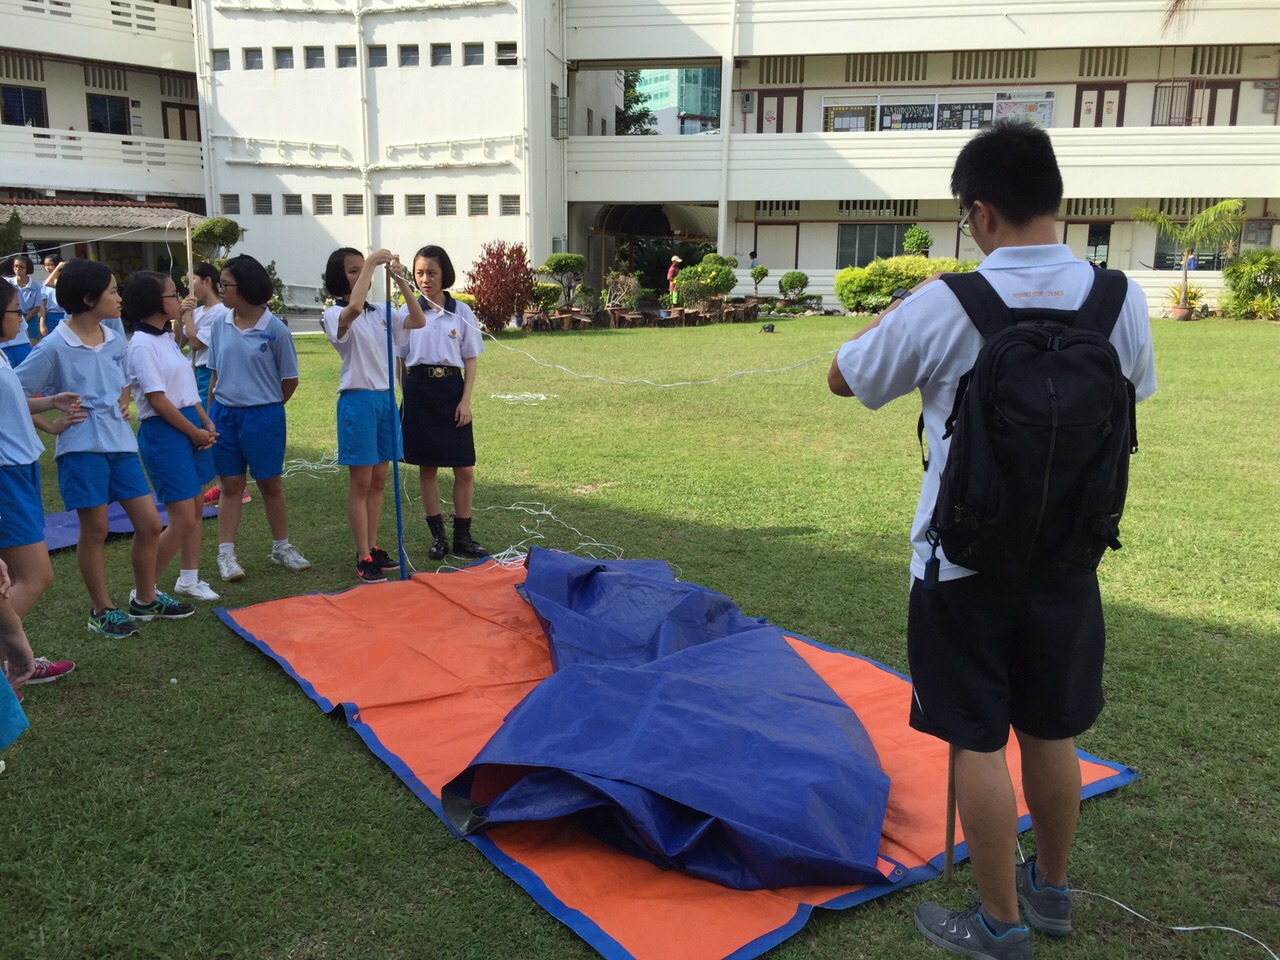 Members were really excited to learn how to set up a tent.